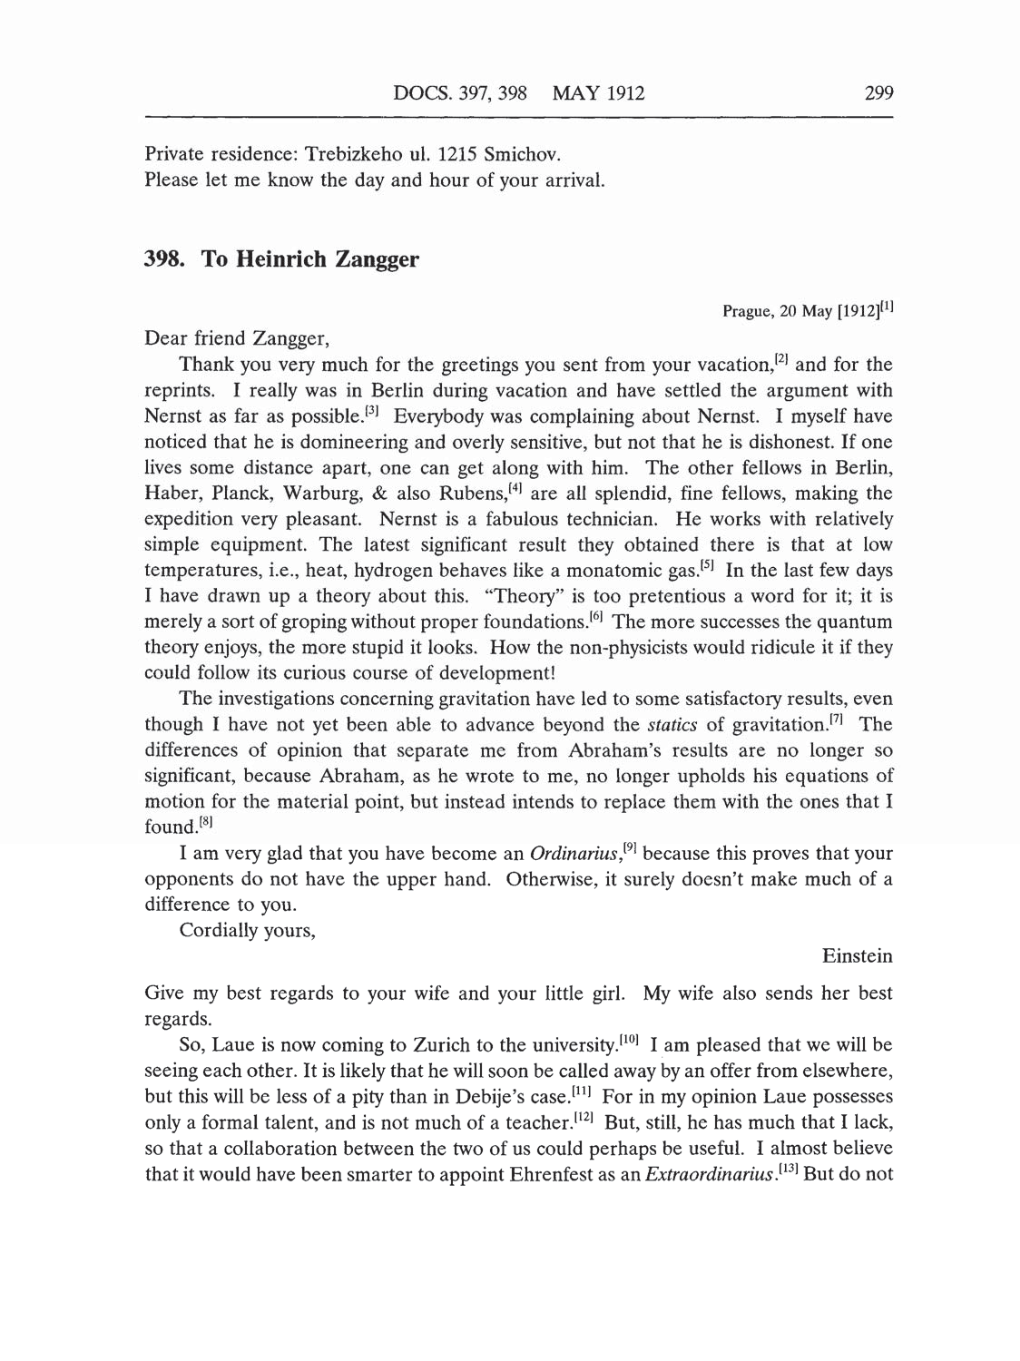 Volume 5: The Swiss Years: Correspondence, 1902-1914 (English translation supplement) page 299